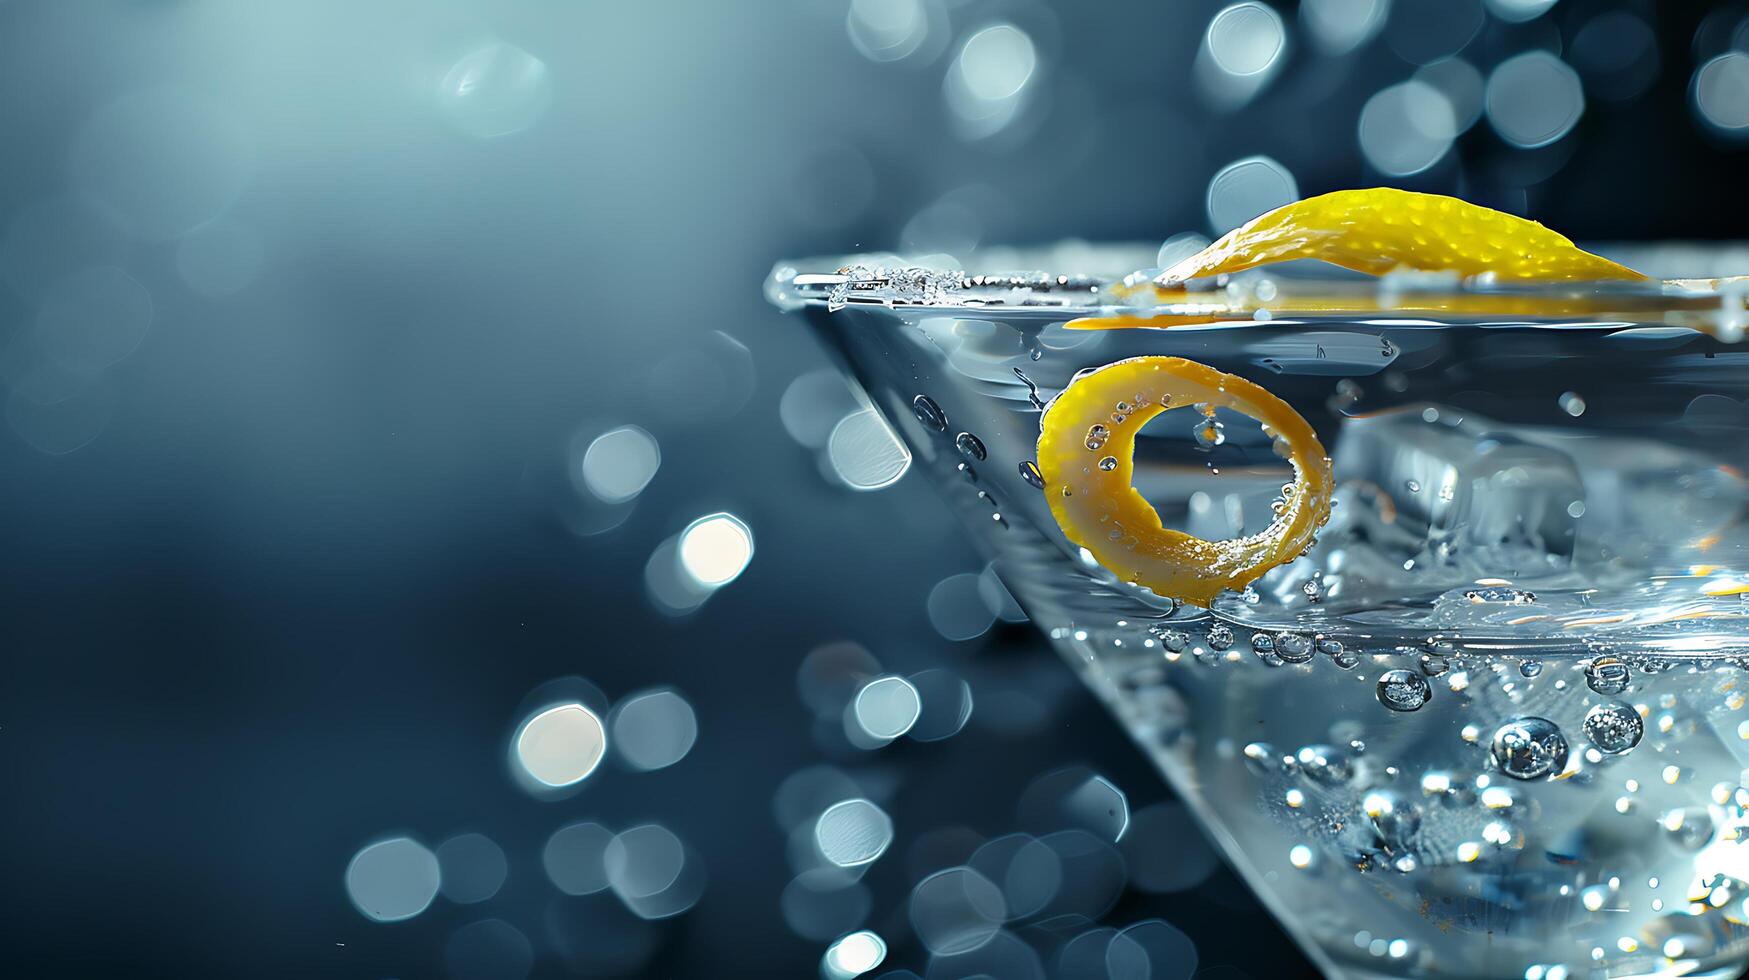 AI generated Elegant Martini Glass Filled With Clear Liquid and Lemon Peel Against Moody Background CloseUp Lens Focus photo